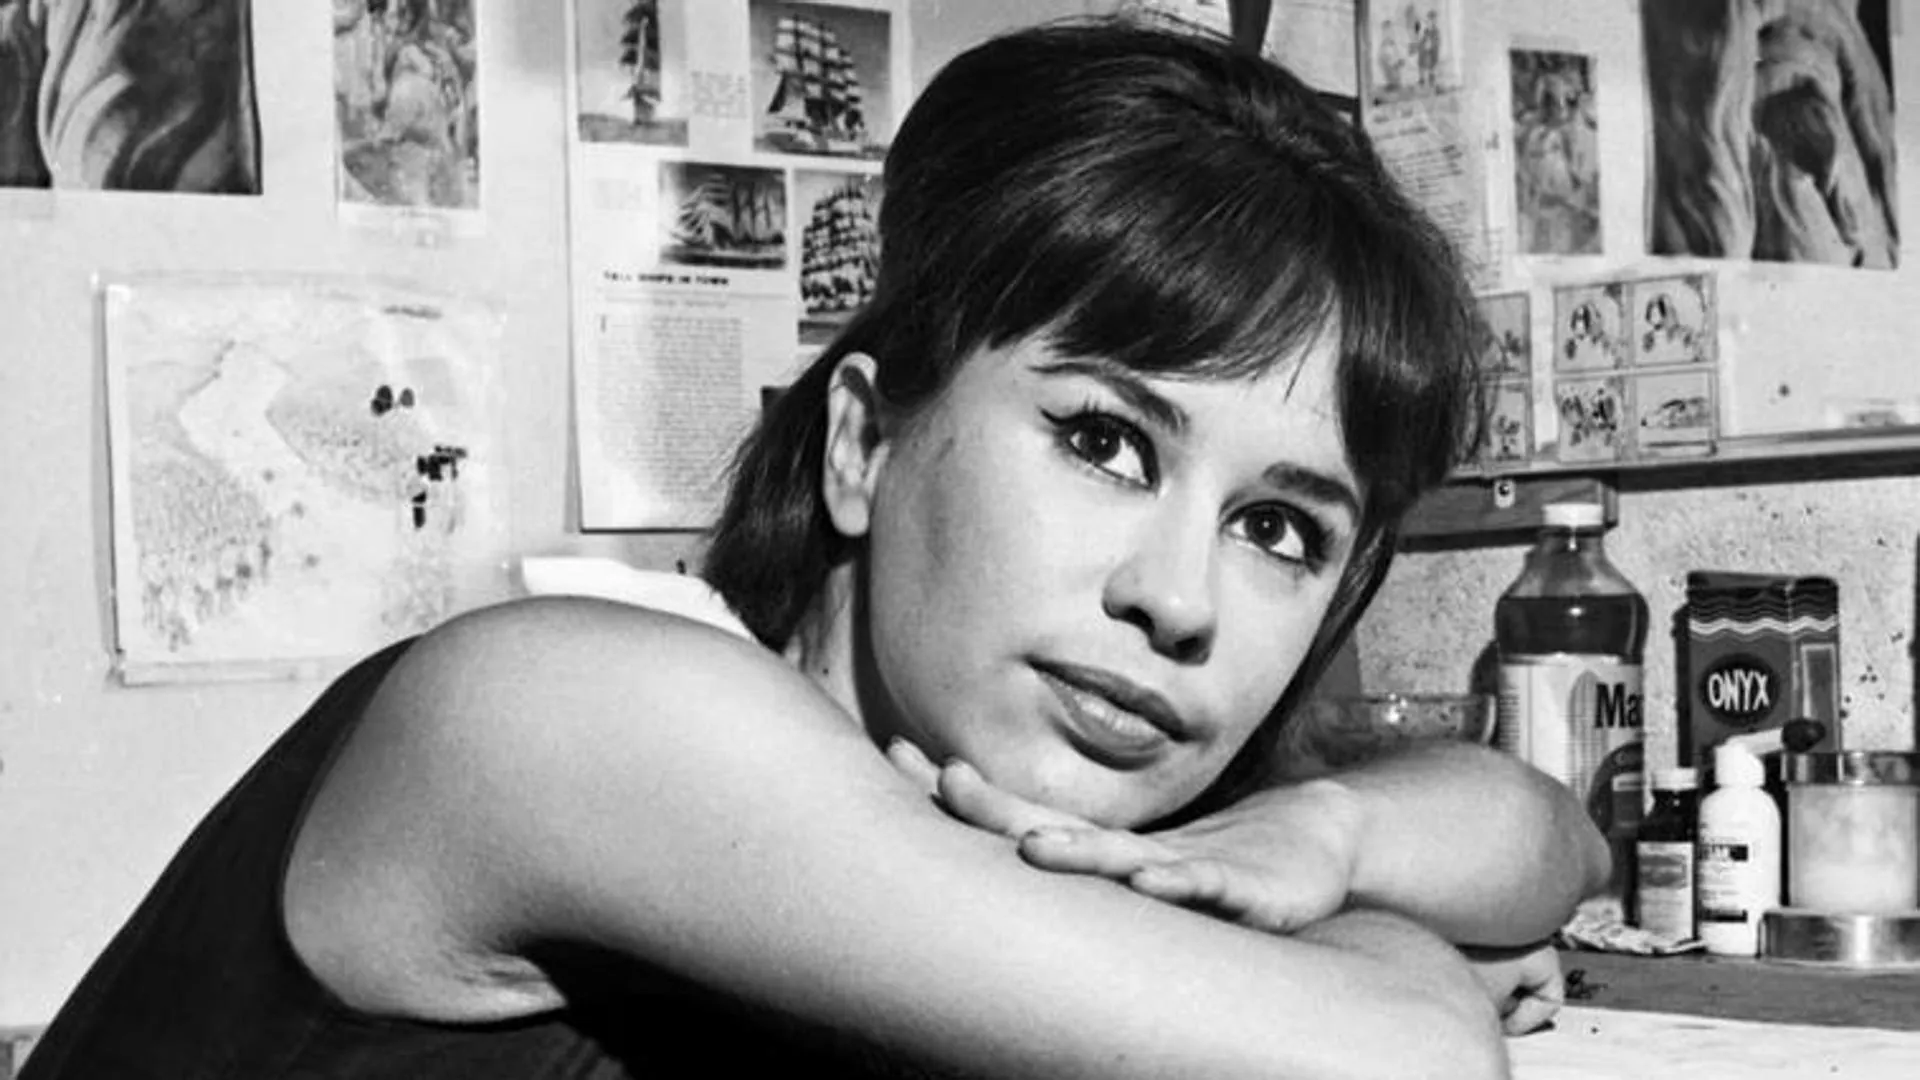 Astrud Gilberto, the voice of 'The Girl from Ipanema', dies